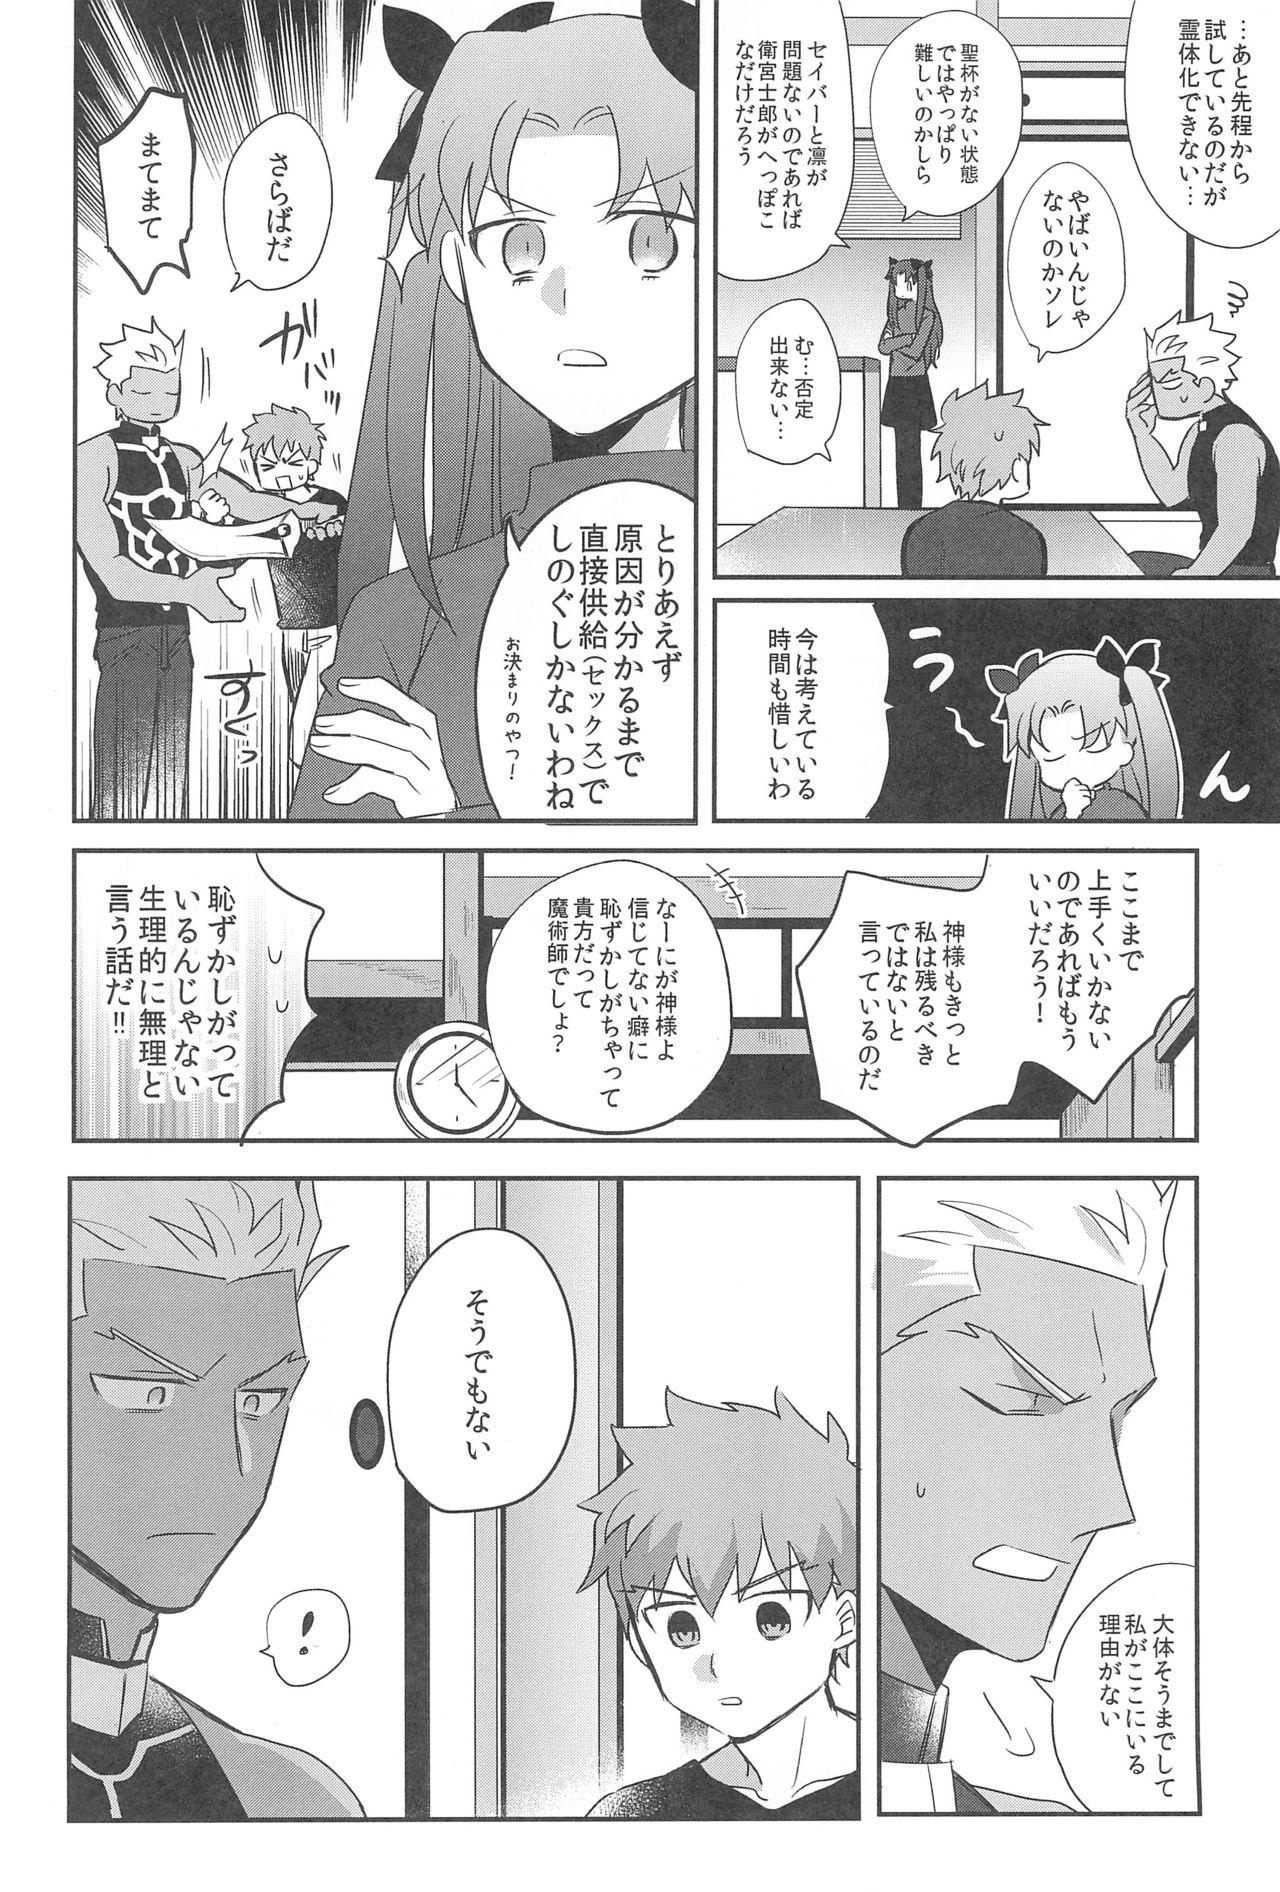 Buttfucking Honban NG! - Fate stay night Hot Girl Porn - Page 6